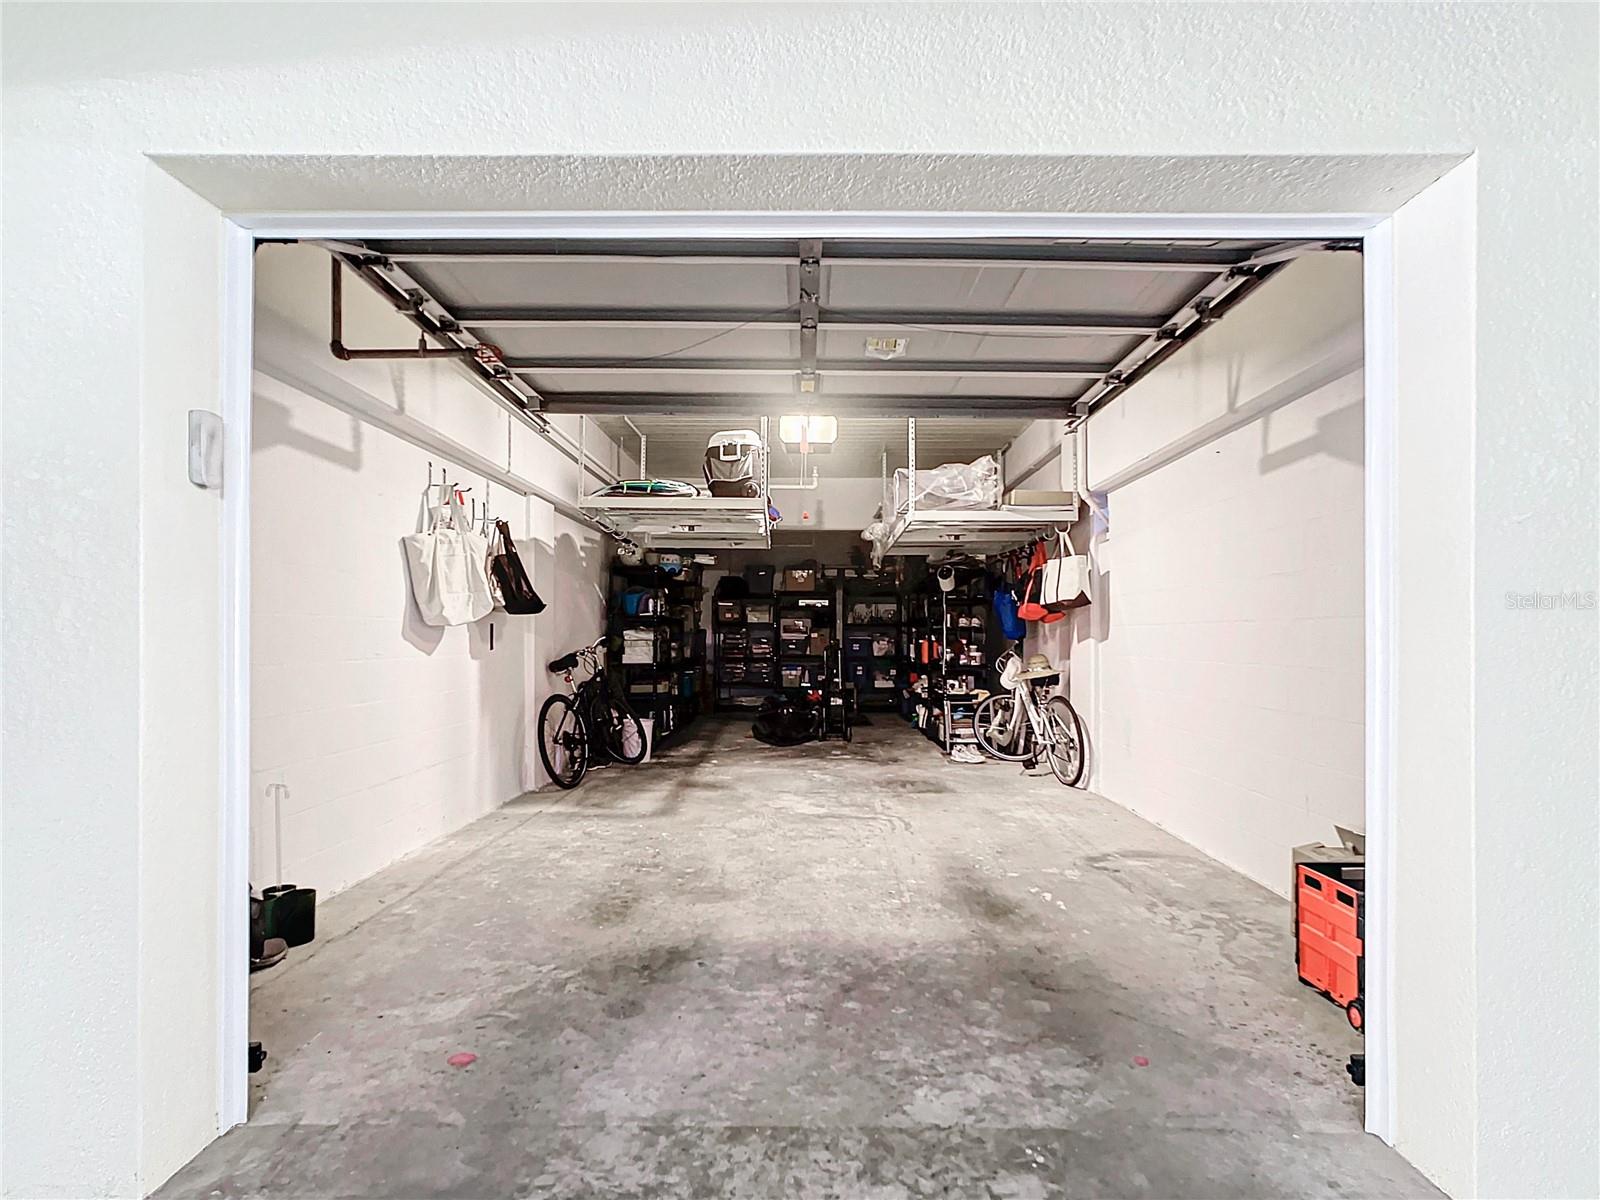 This shows how large this garage is.  If you only have one car there is room for lots of storage and one car fits nicely.